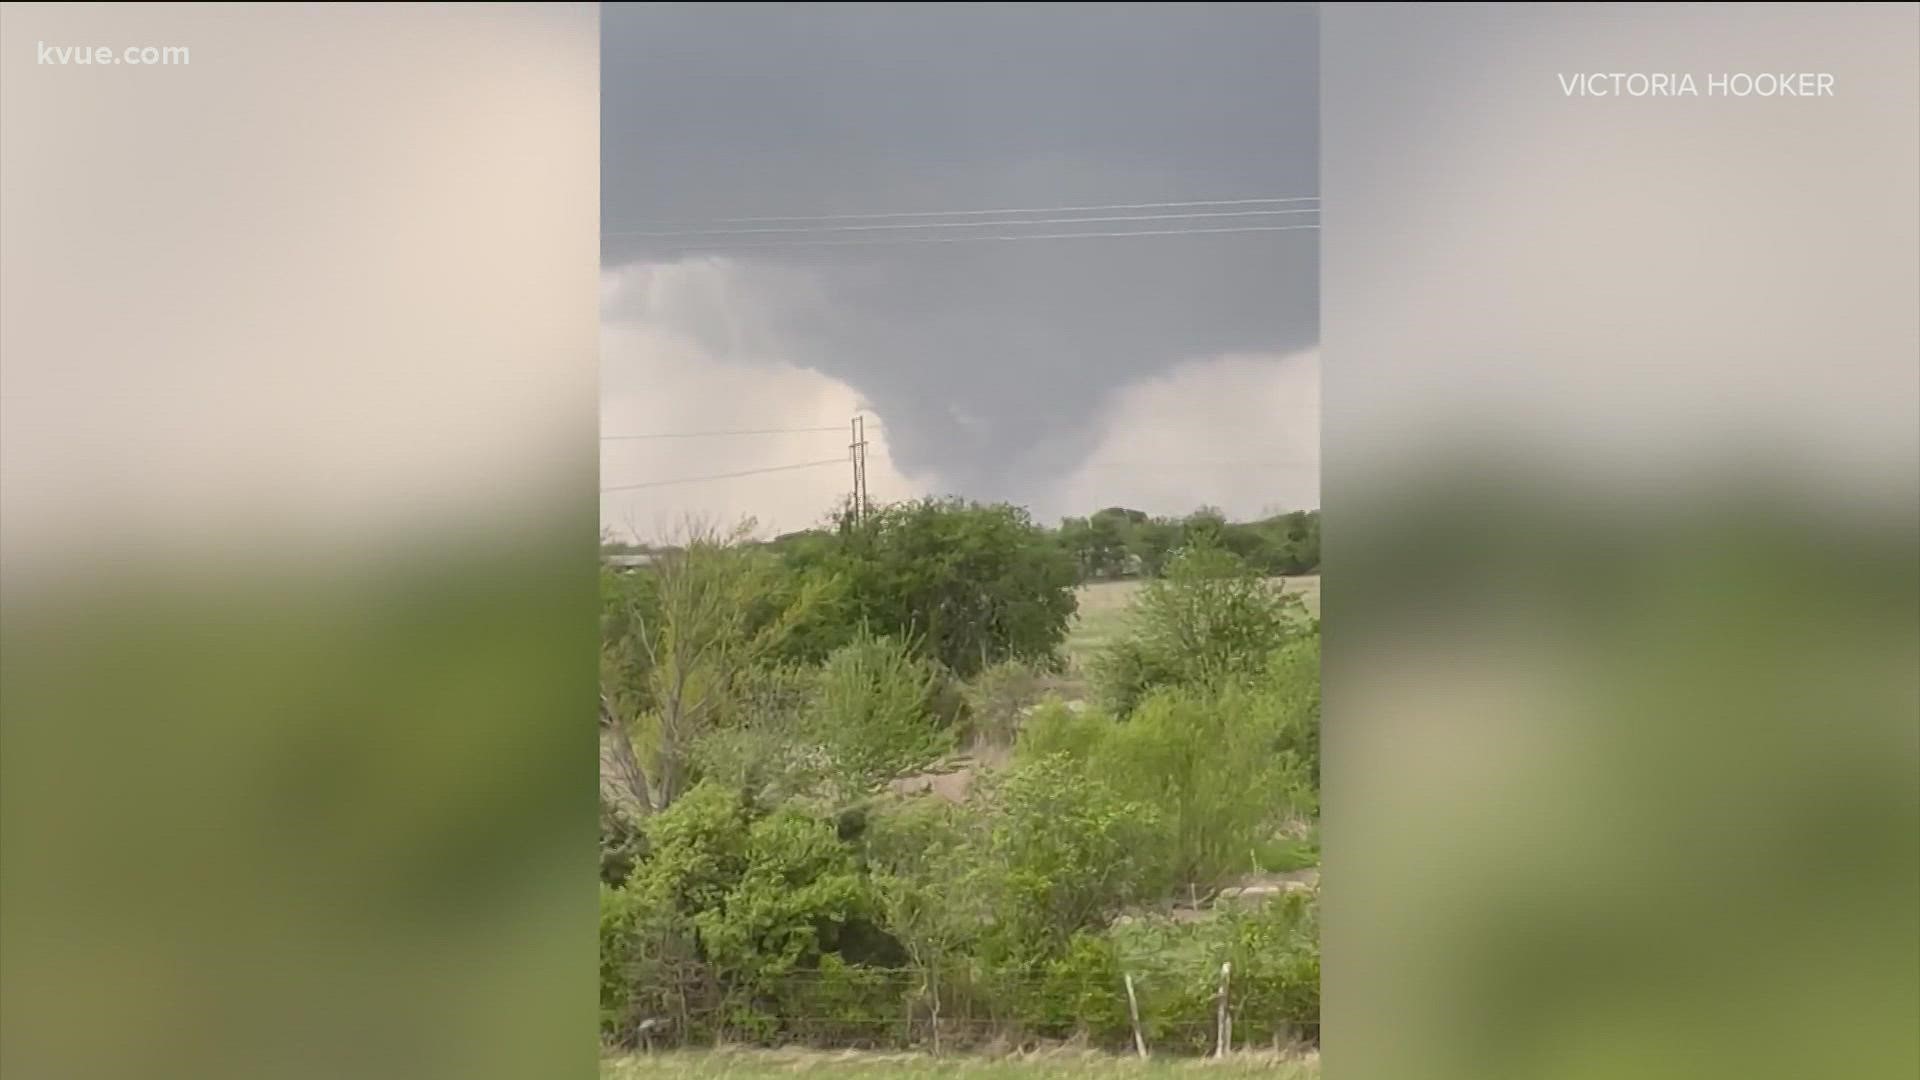 The tornado has reportedly moved out of the KVUE viewing area.